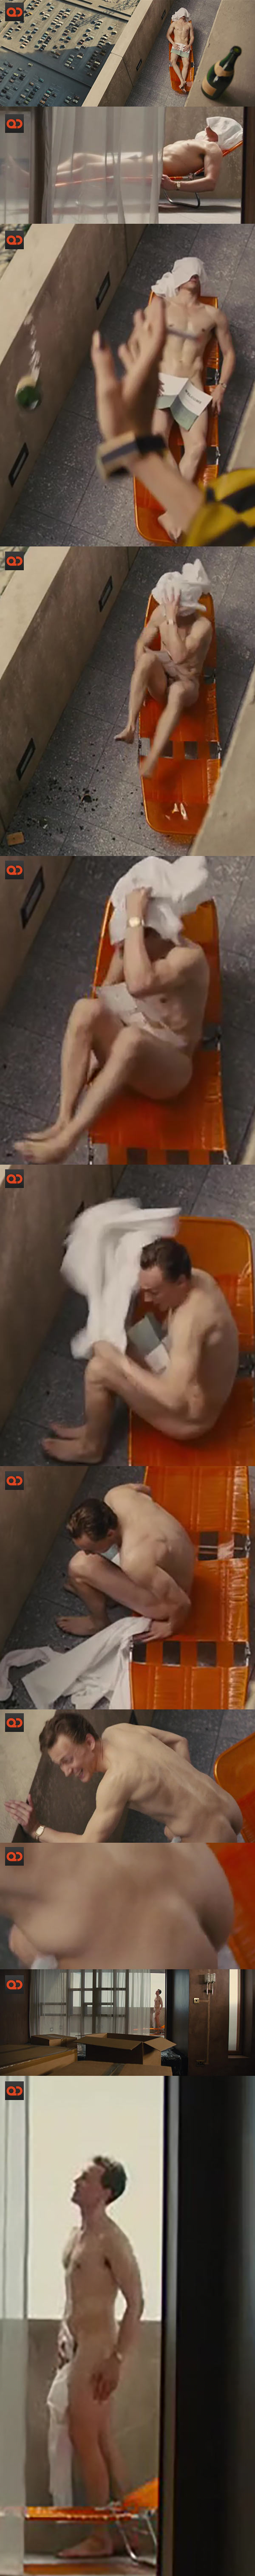 Tom Hiddleston Flashes His Dick And Butt In The Trailer Of His Latest Movie - Uncensored Photo!